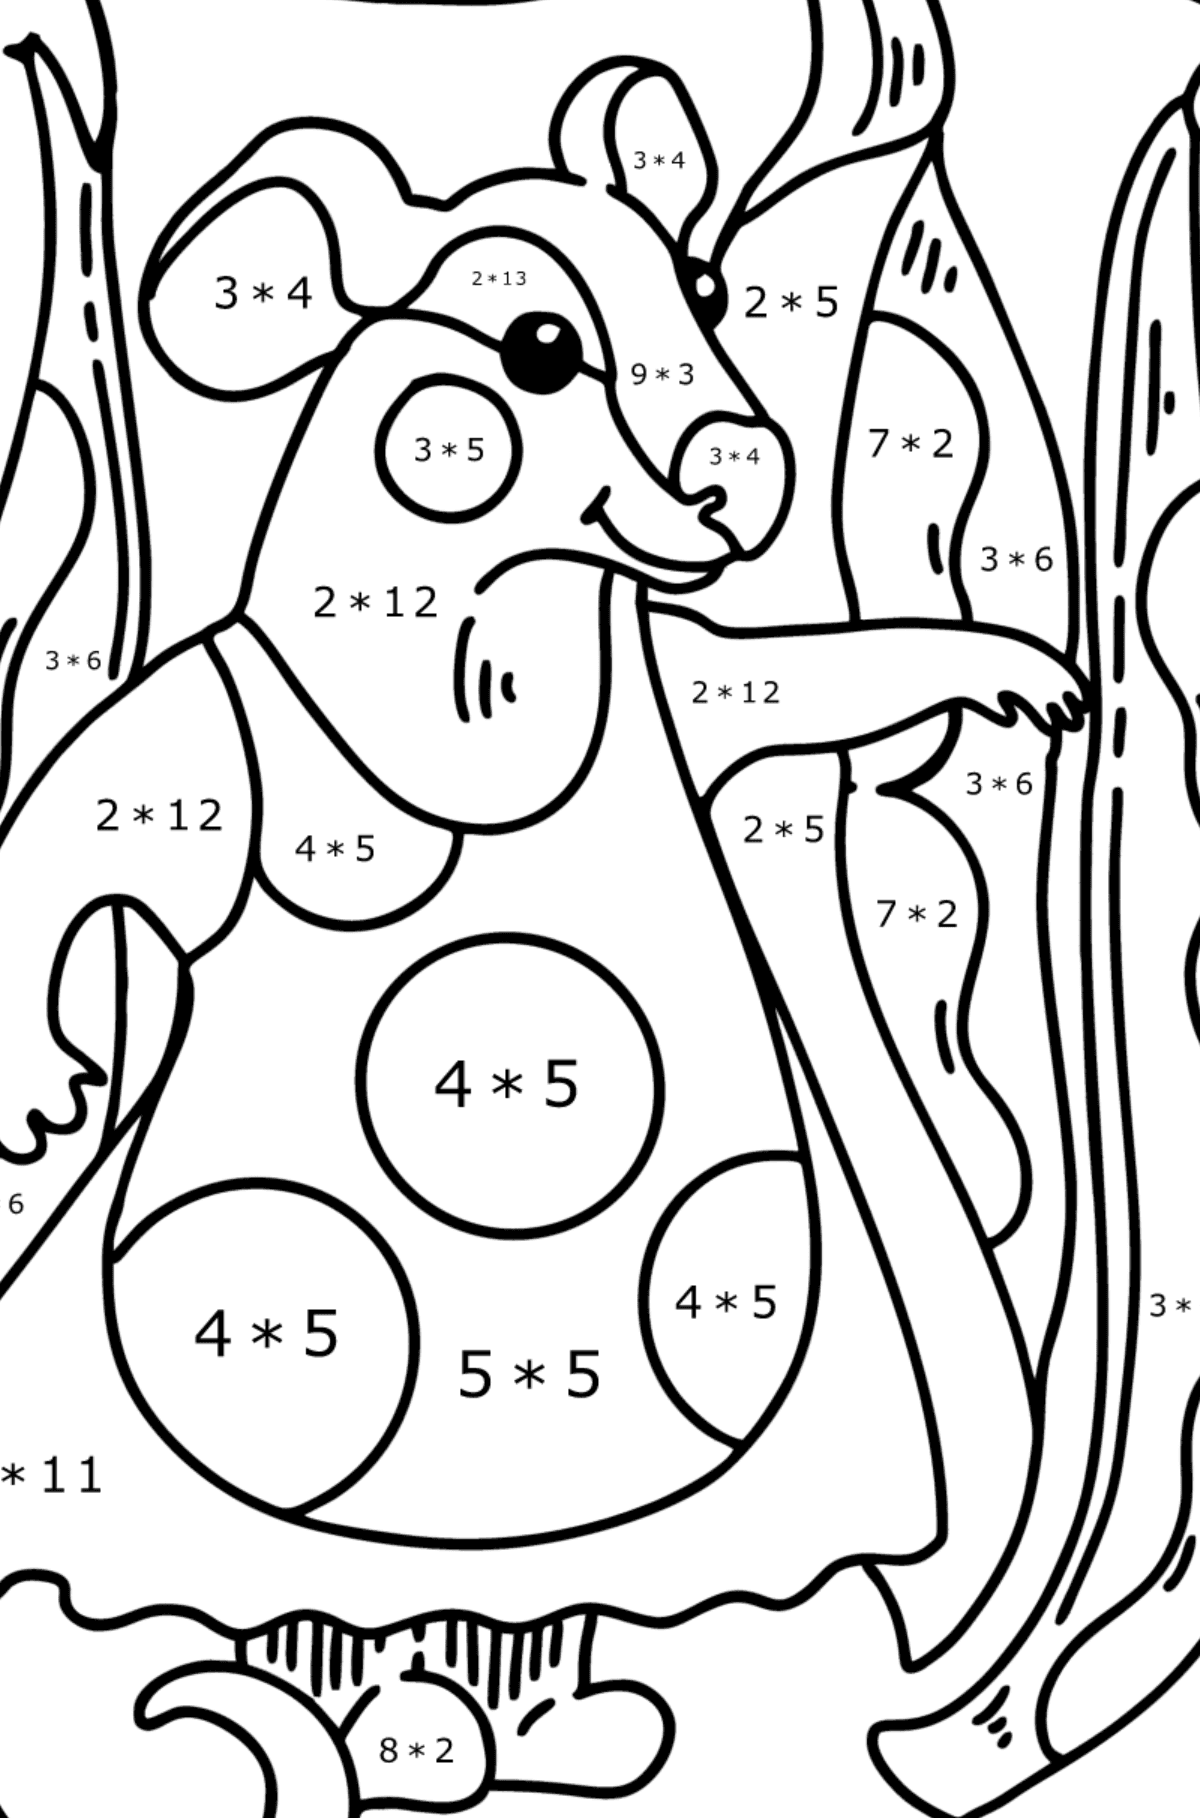 Coloring page - Cute Mouse - Math Coloring - Multiplication for Kids